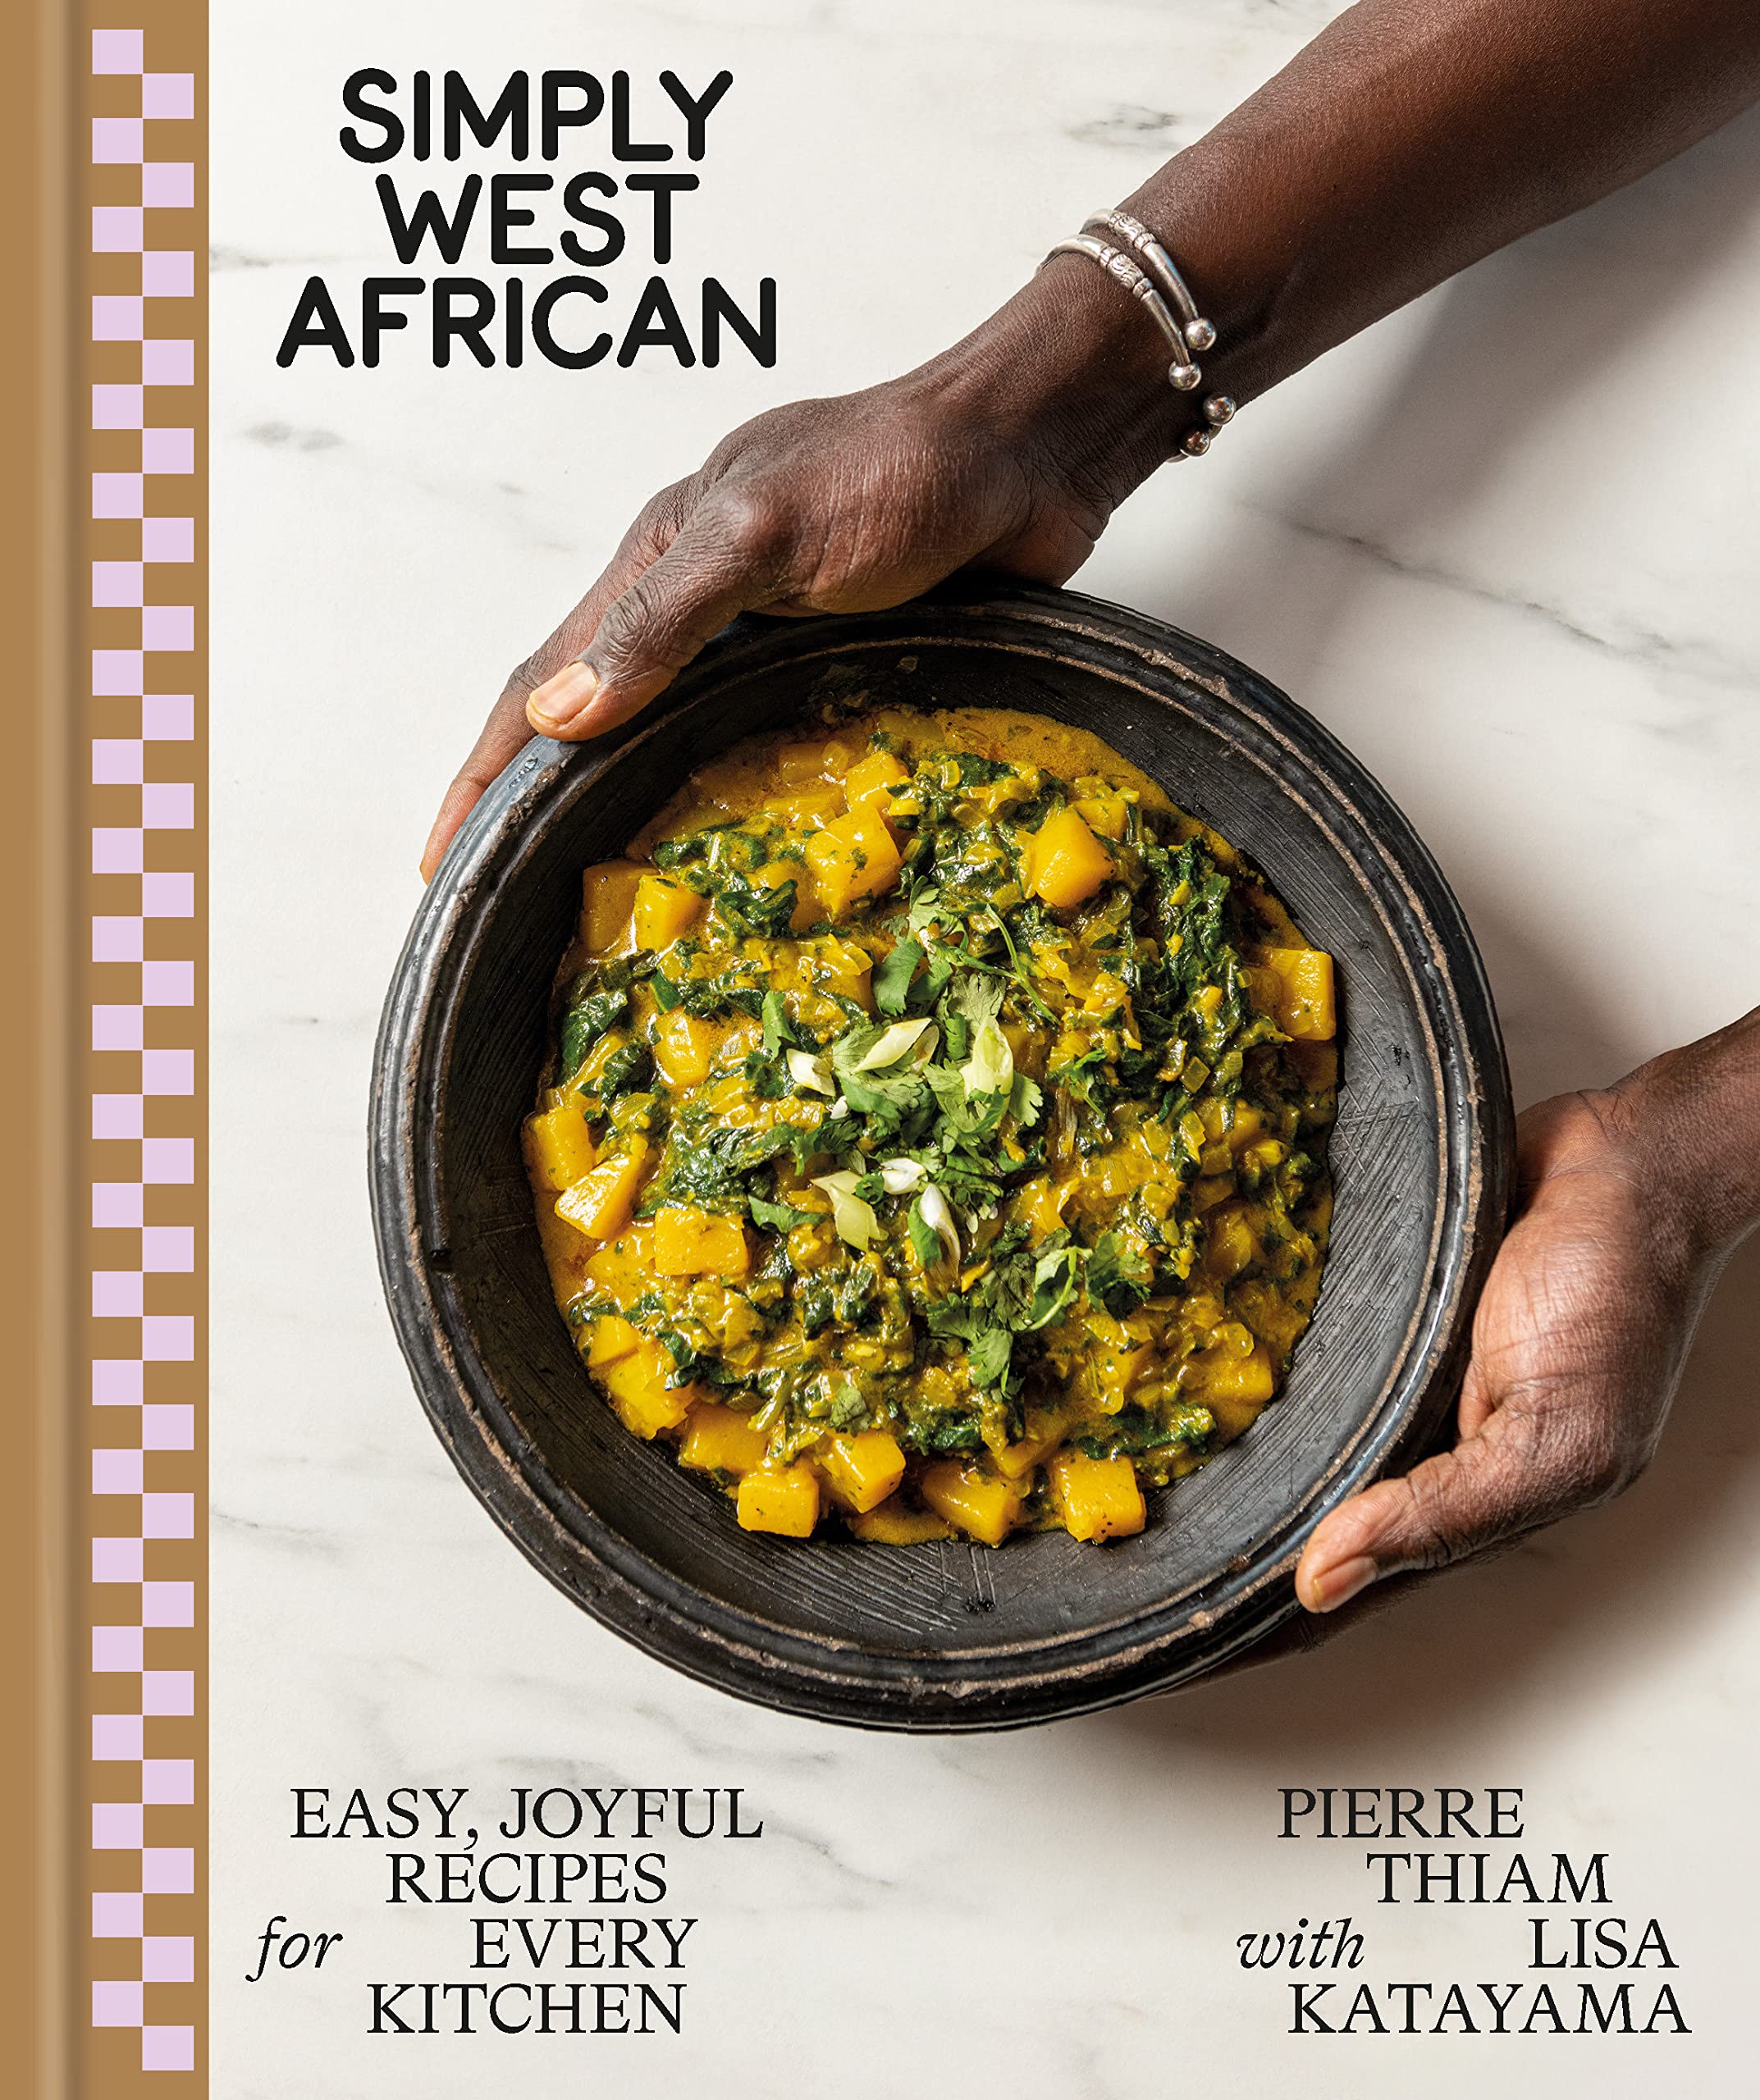 Simply West African: Easy, Joyful Recipes for Every Kitchen (Pierre Thiam, Lisa Katayama) *Signed*